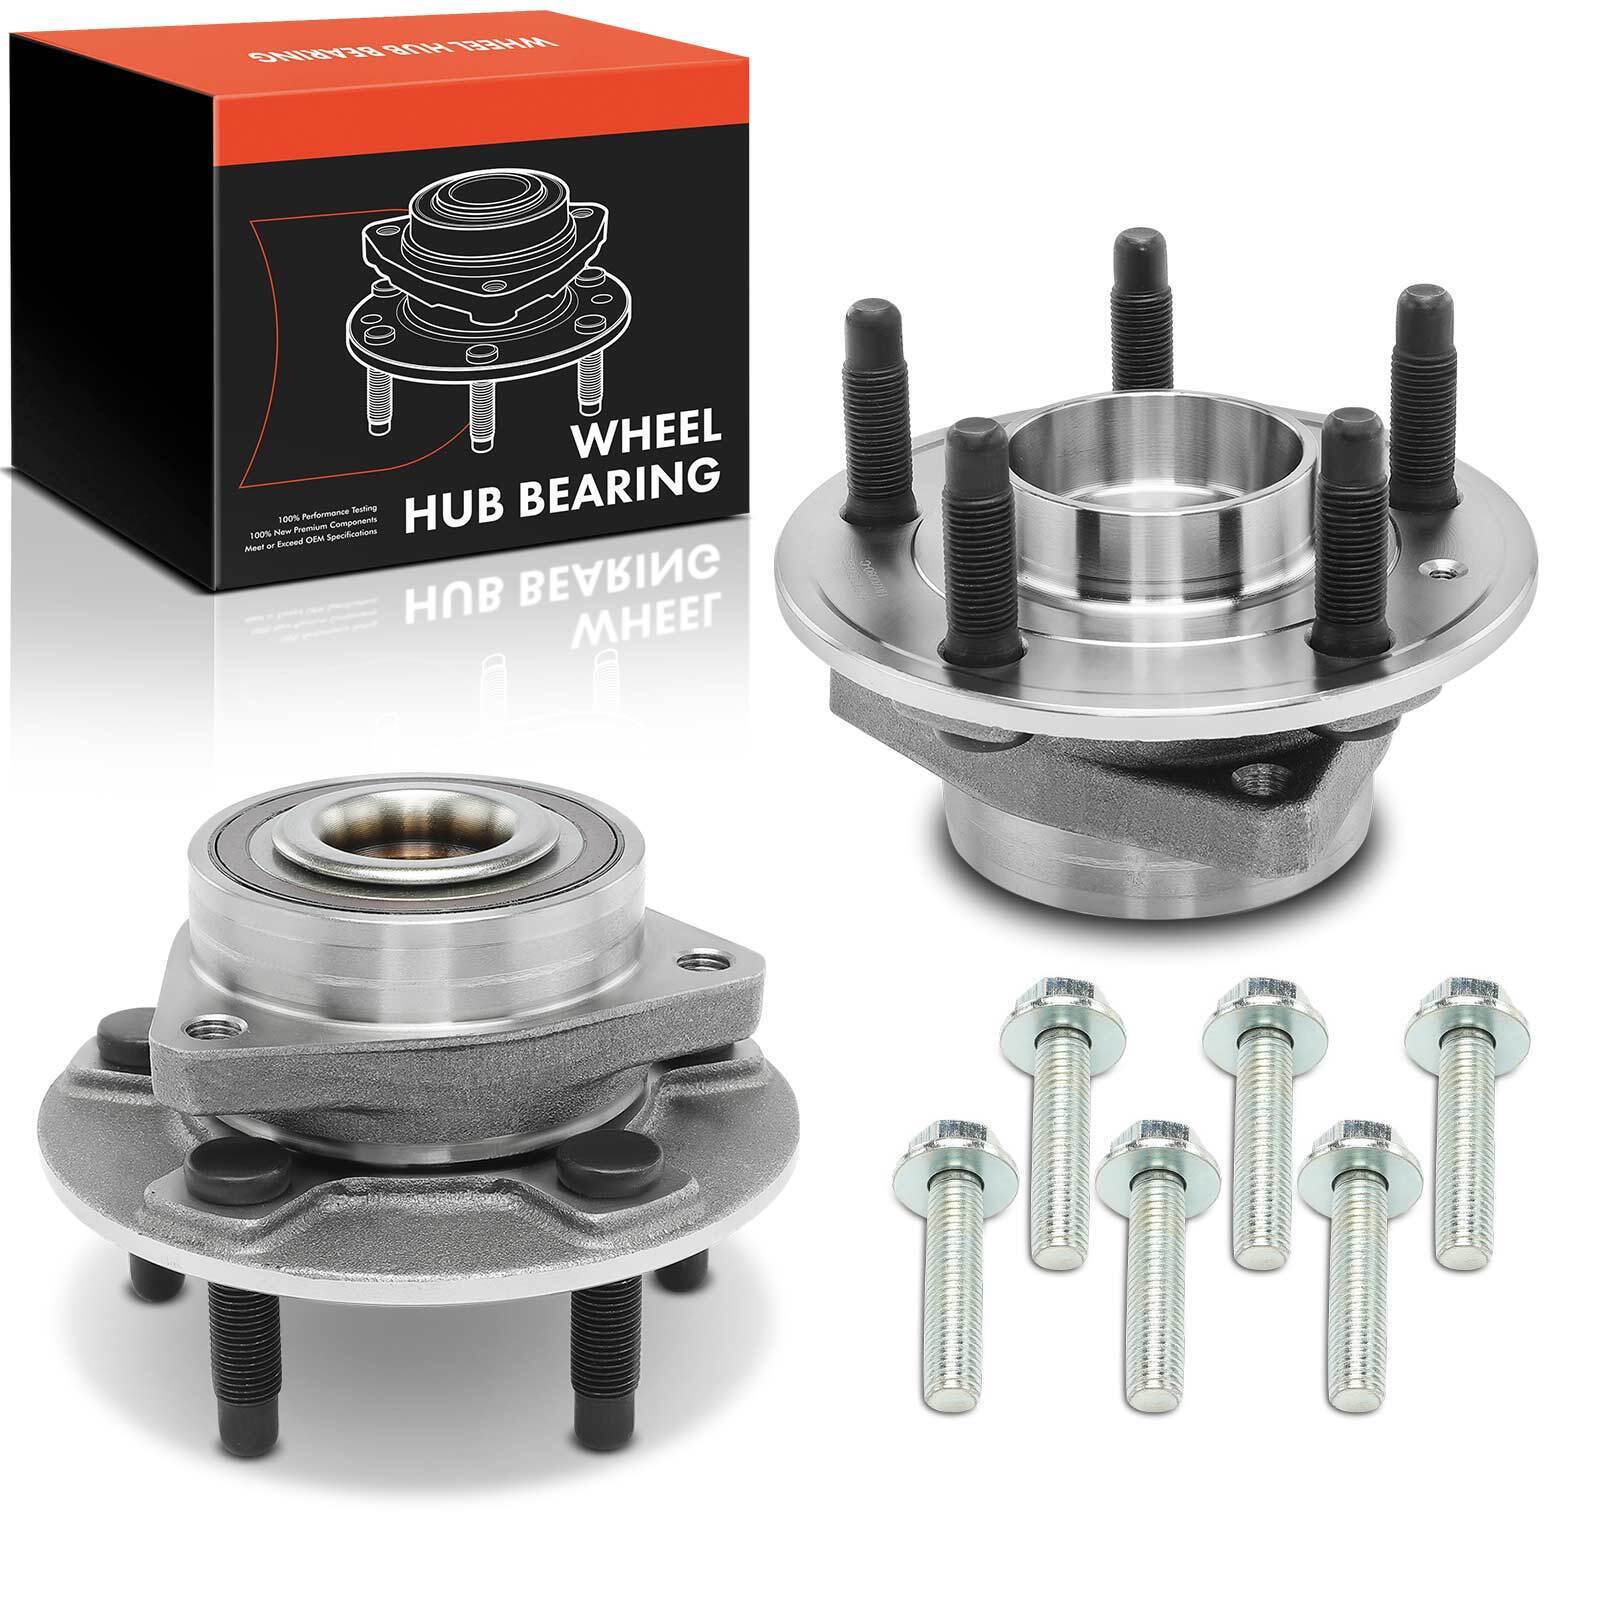 2x Front or Rear Wheel Hub Bearing Assembly for Chevrolet Equinox Cadillac GMC